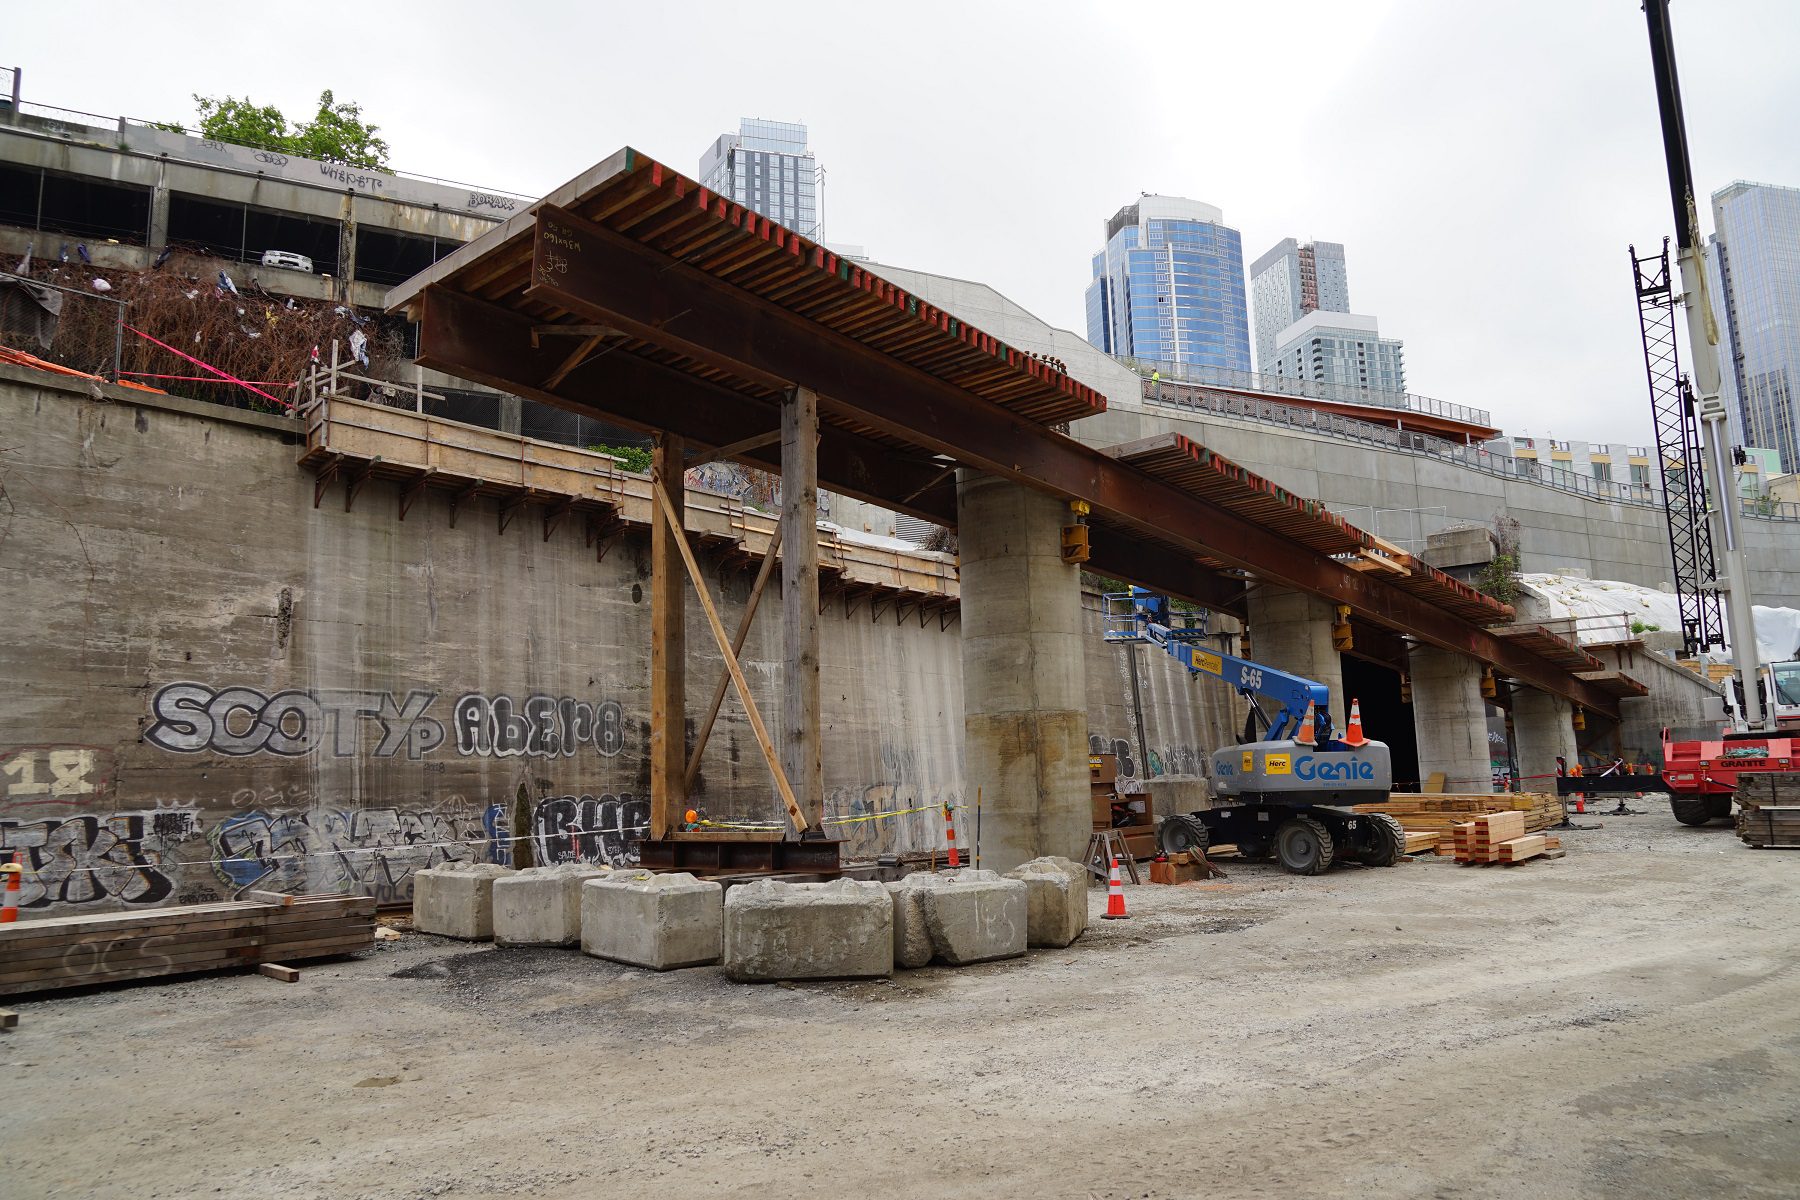 An example of falsework in place for bridge construction. This photo is from construction of the new bridge over the railroad tracks north of Pine St in June 2020. Similar falsework can be expected over Alaskan Way at Marion St. Construction equipment is also present in the middle and right of the image, with large towers in the background.